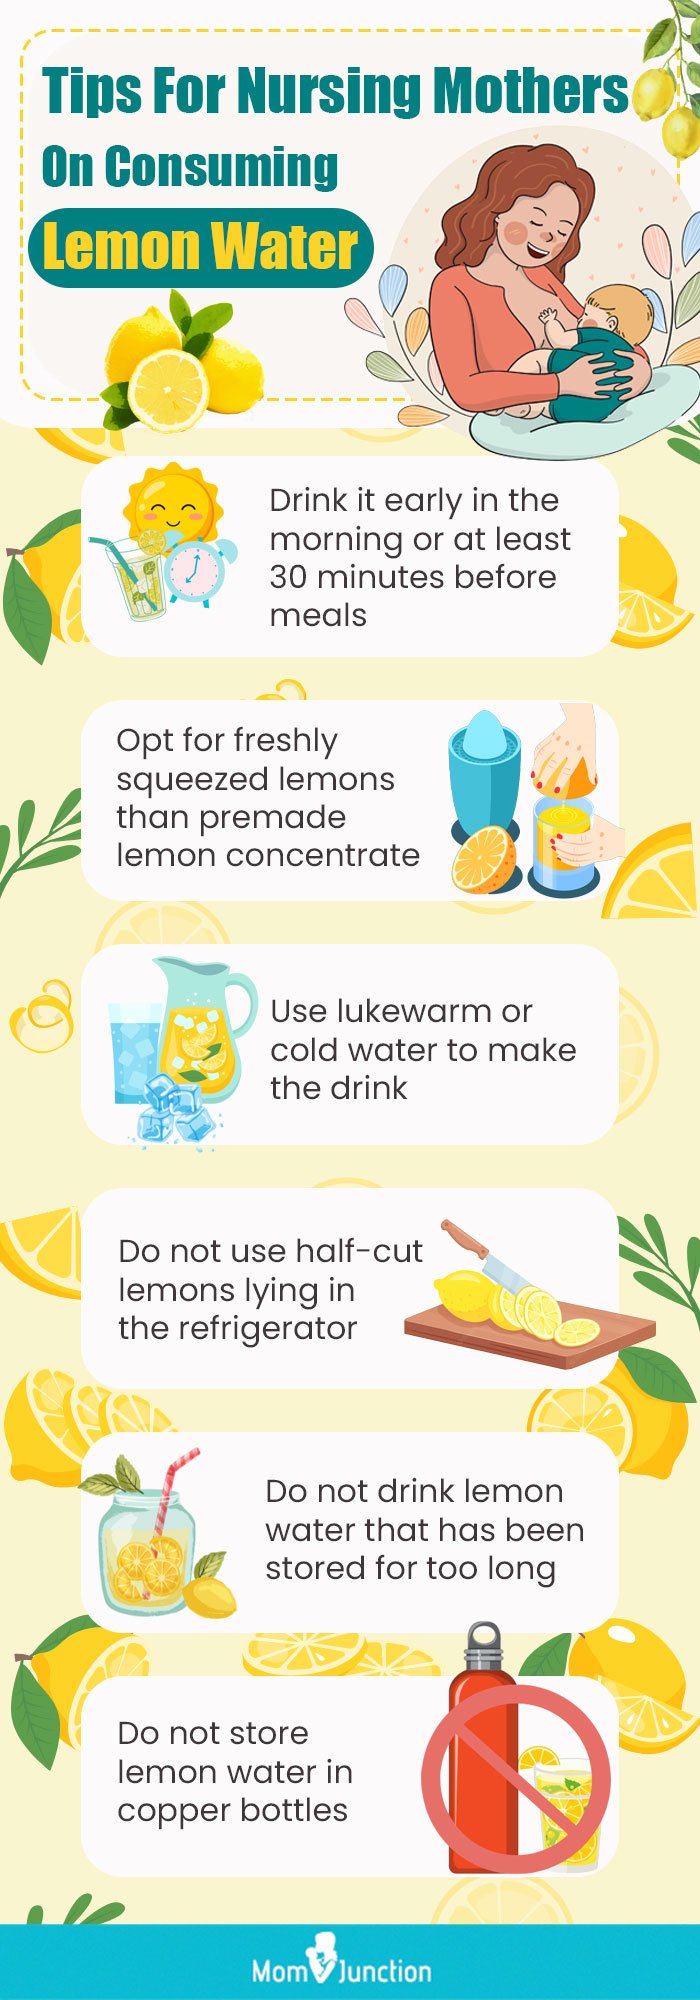 tips for nursing mothers on consuming lemon water (infographic)